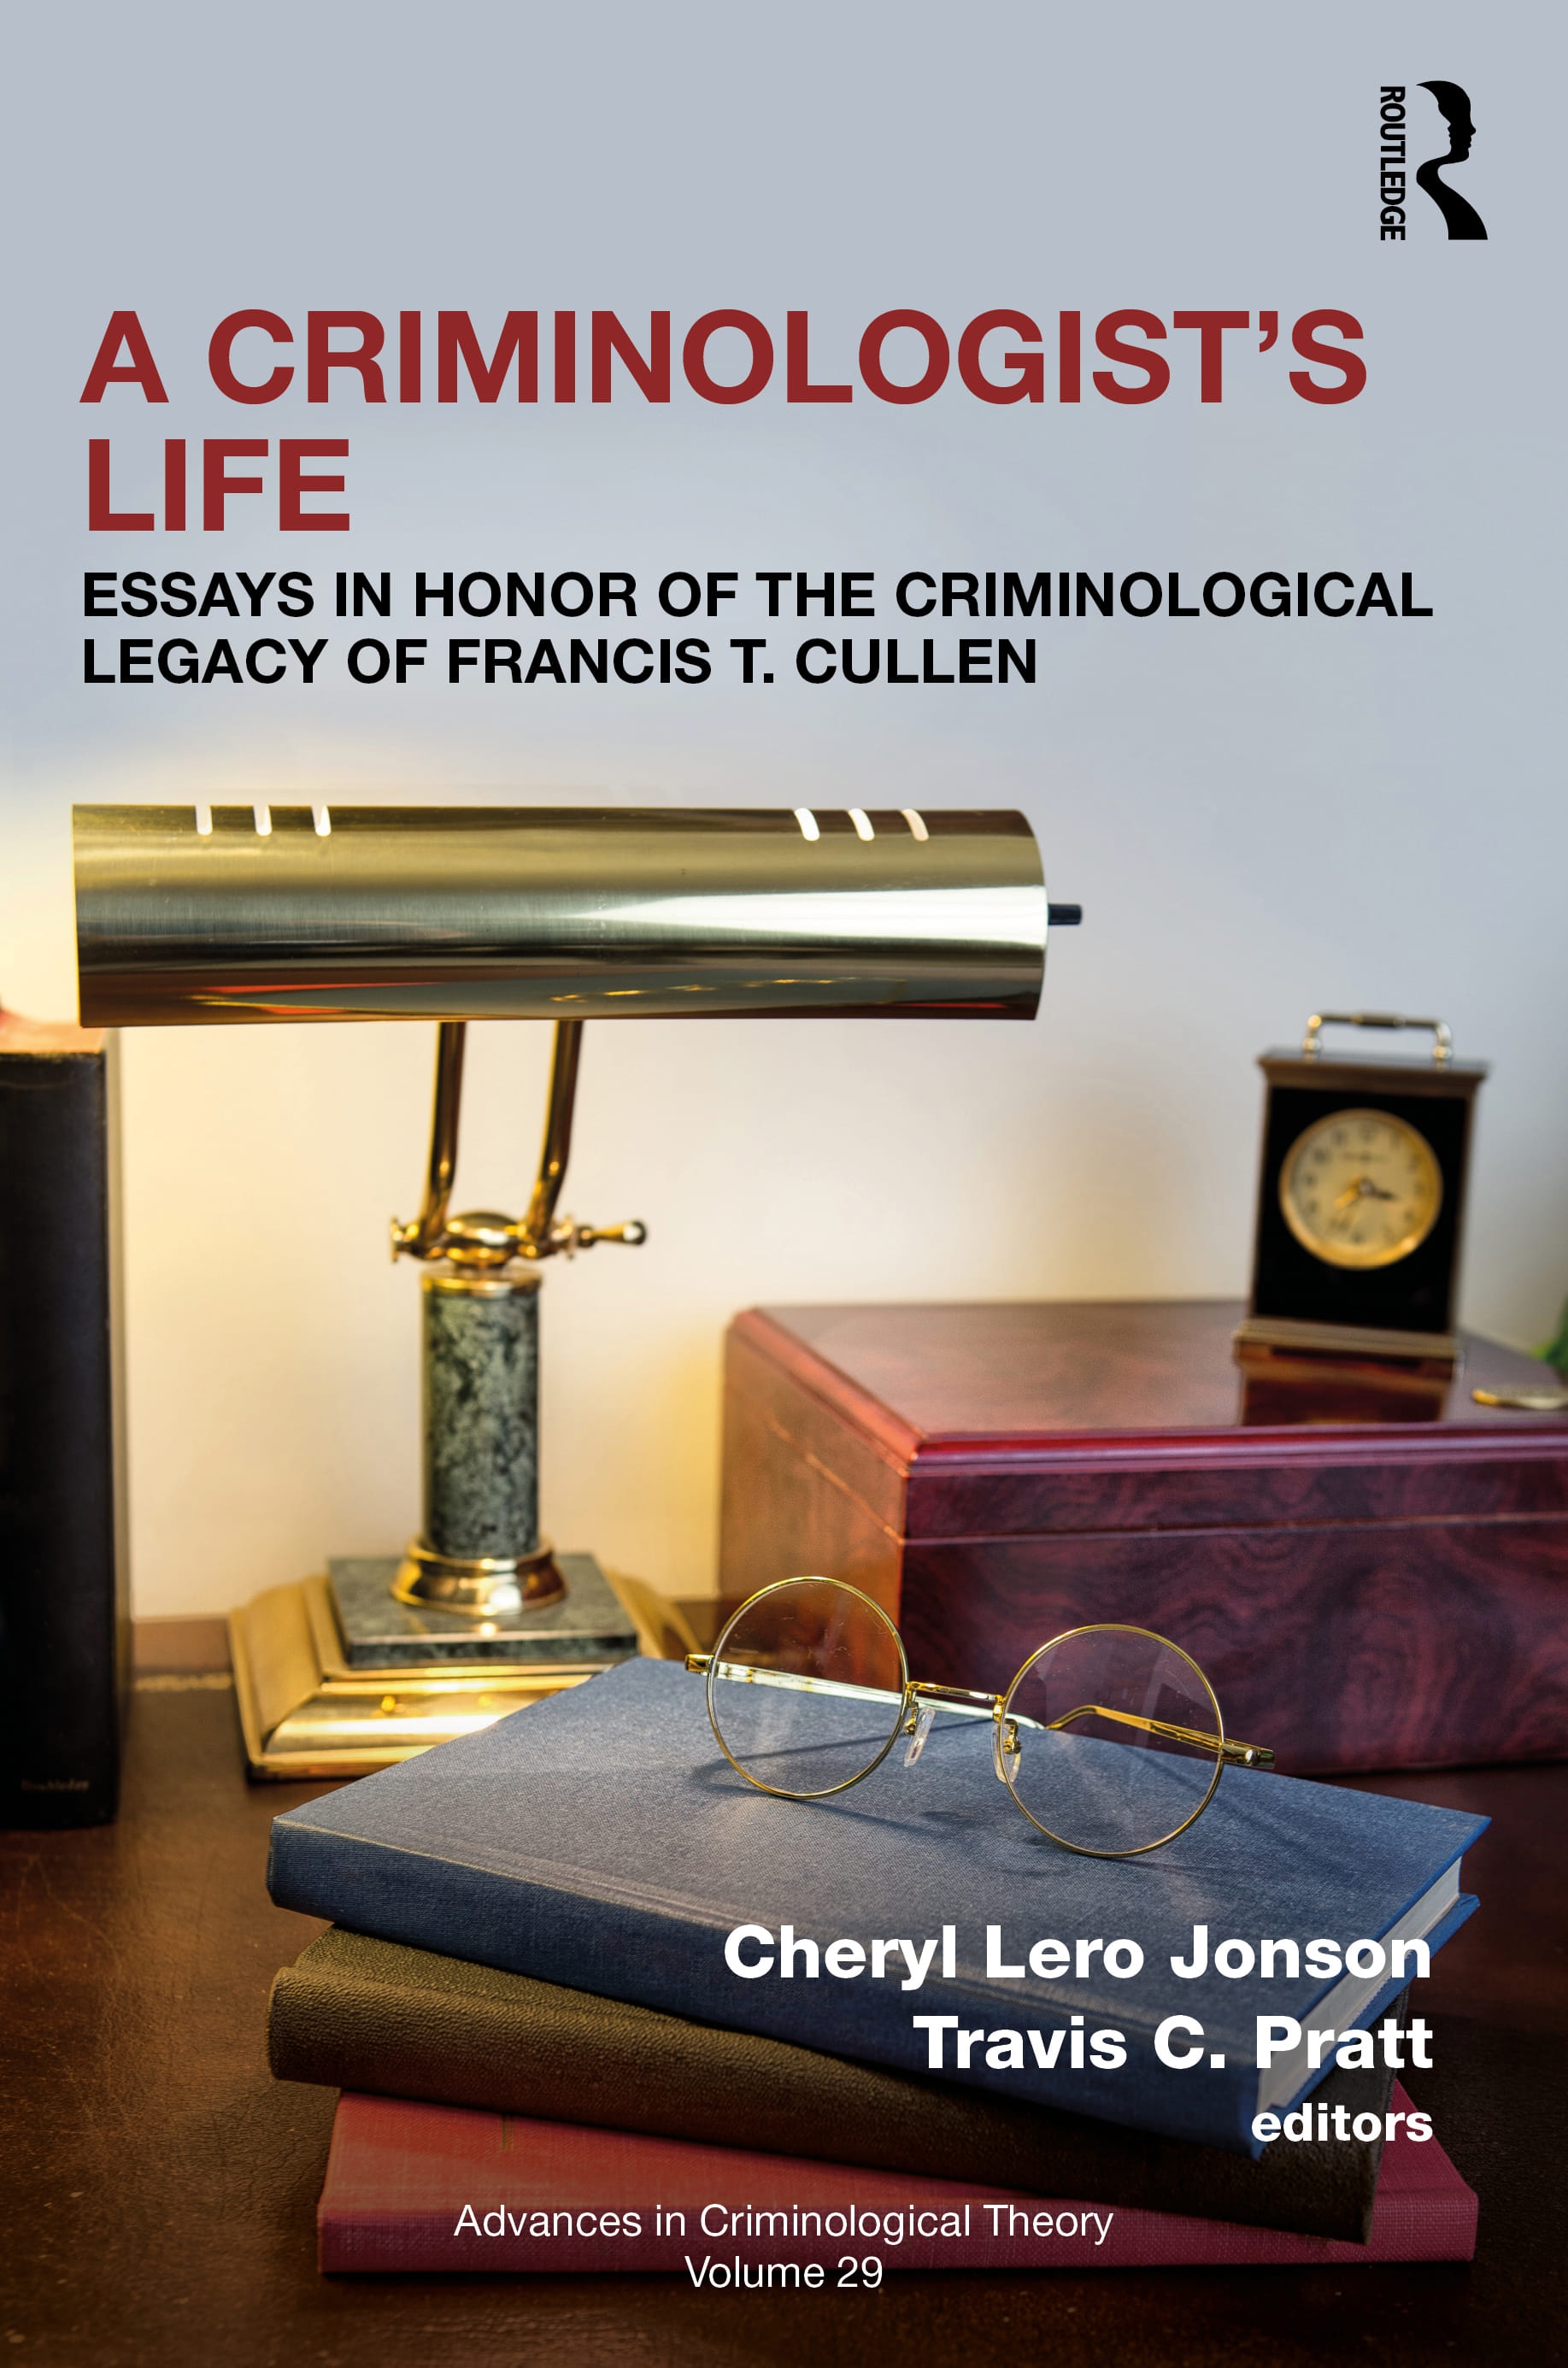 A Criminologist’s Life: Essays in Honor of the Criminological Legacy of Francis T. Cullen